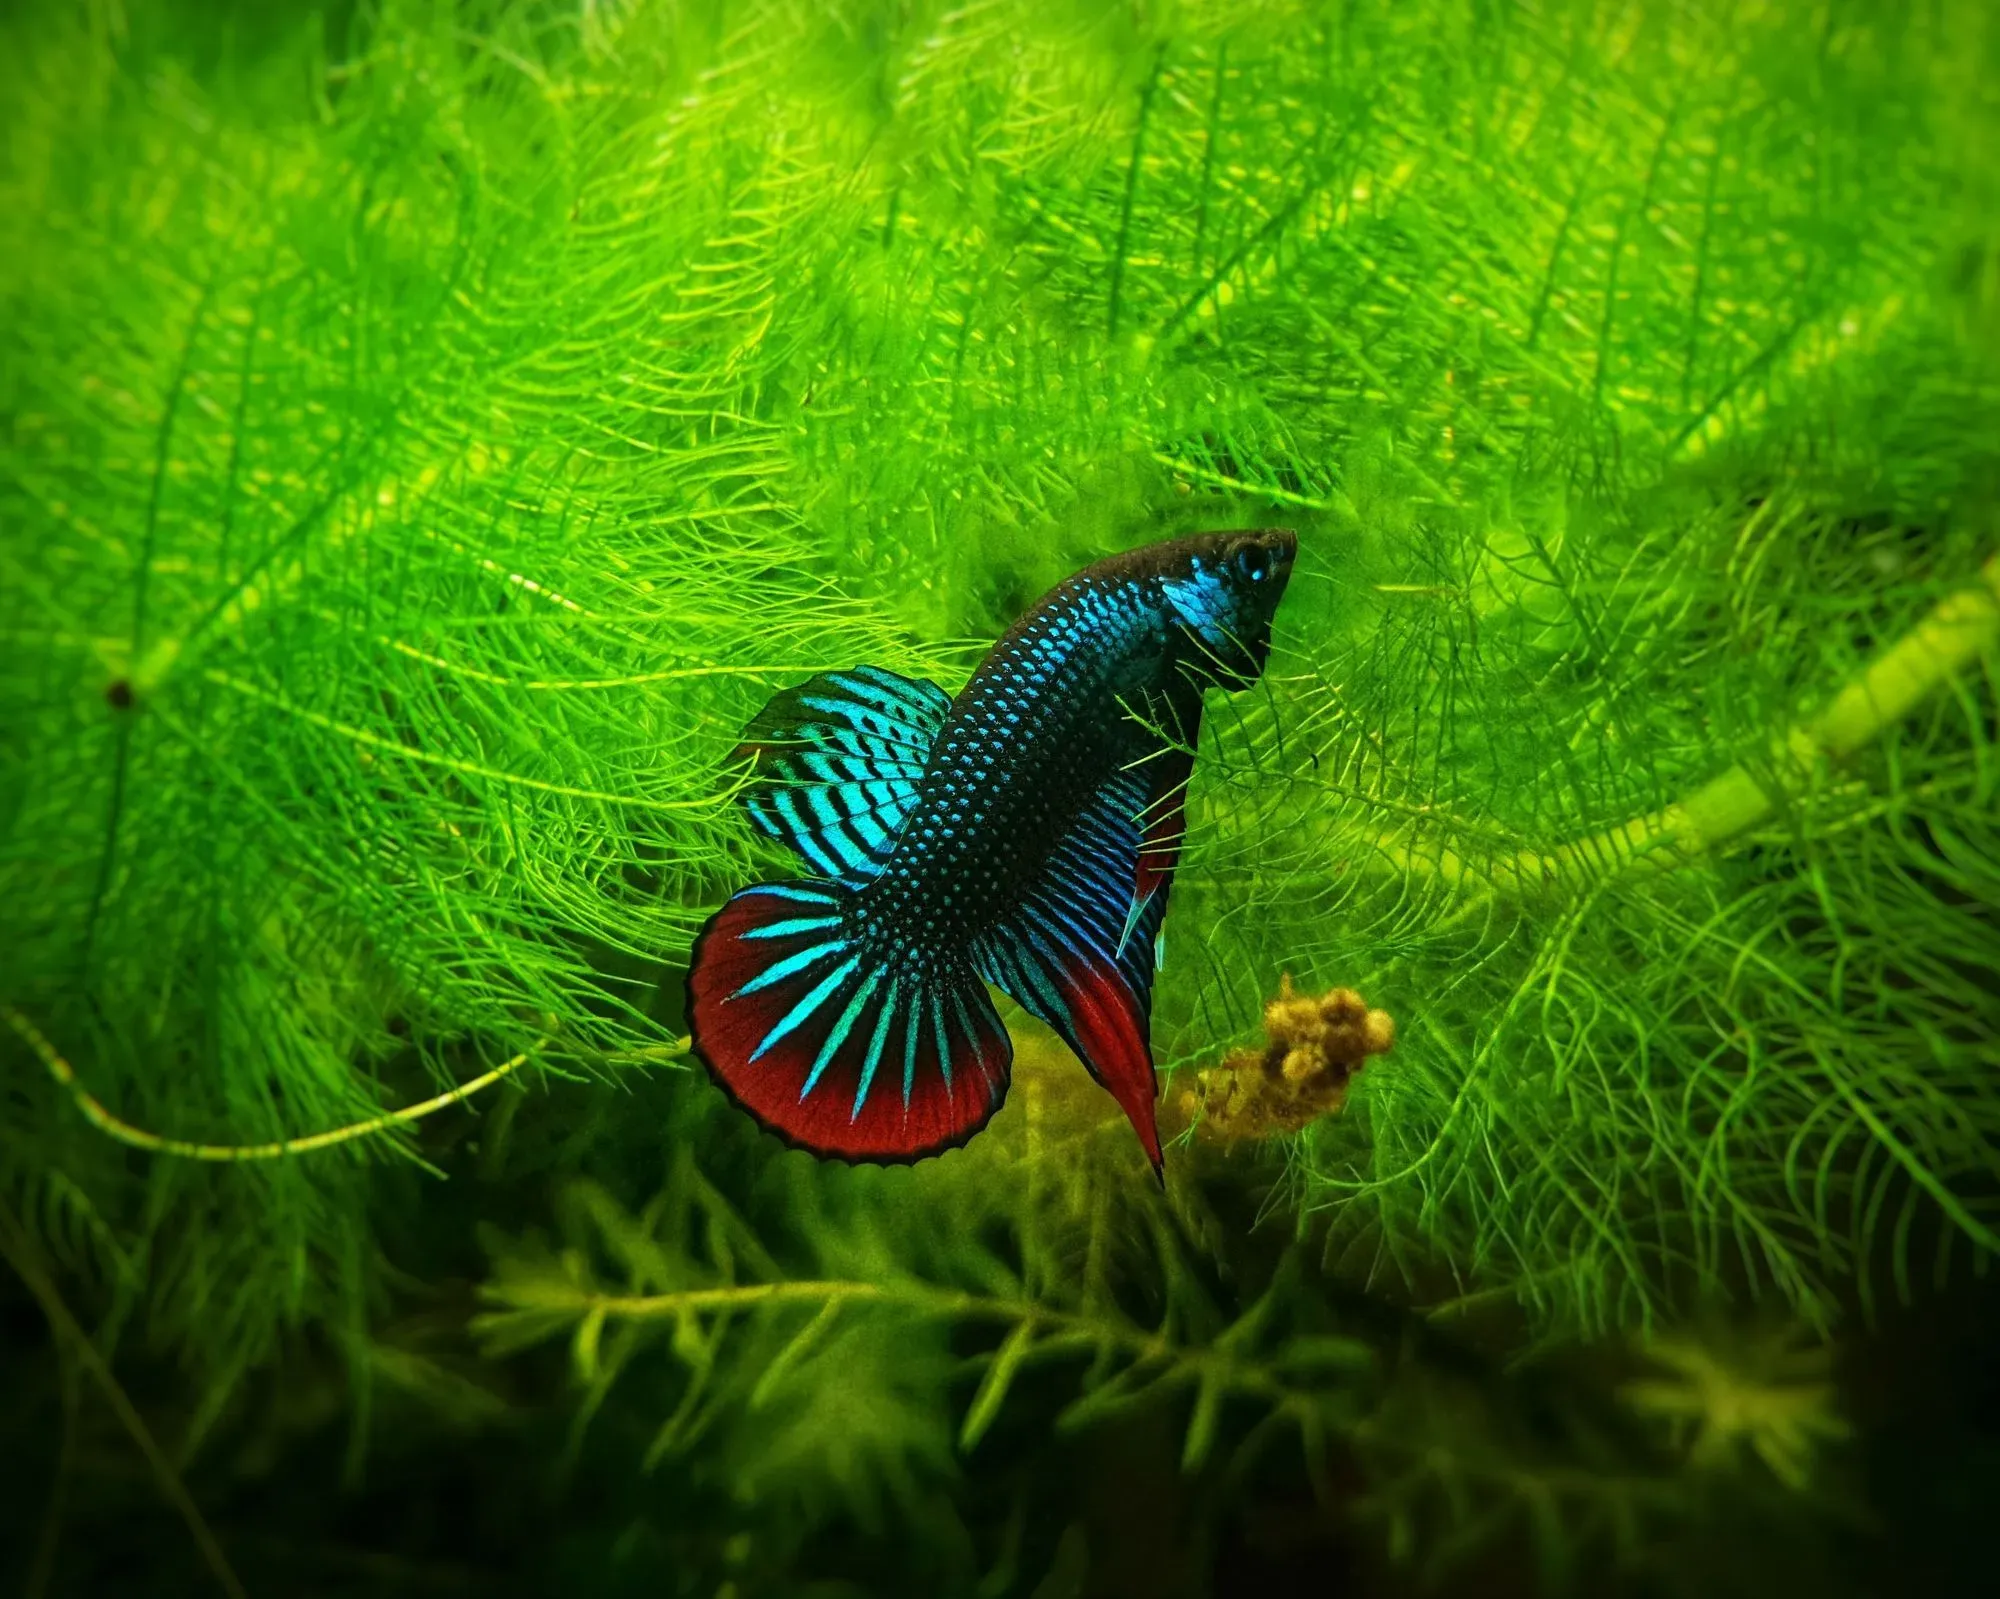 A feeding schedule should be maintained to have a healthy betta fish for the longest period of time possible.